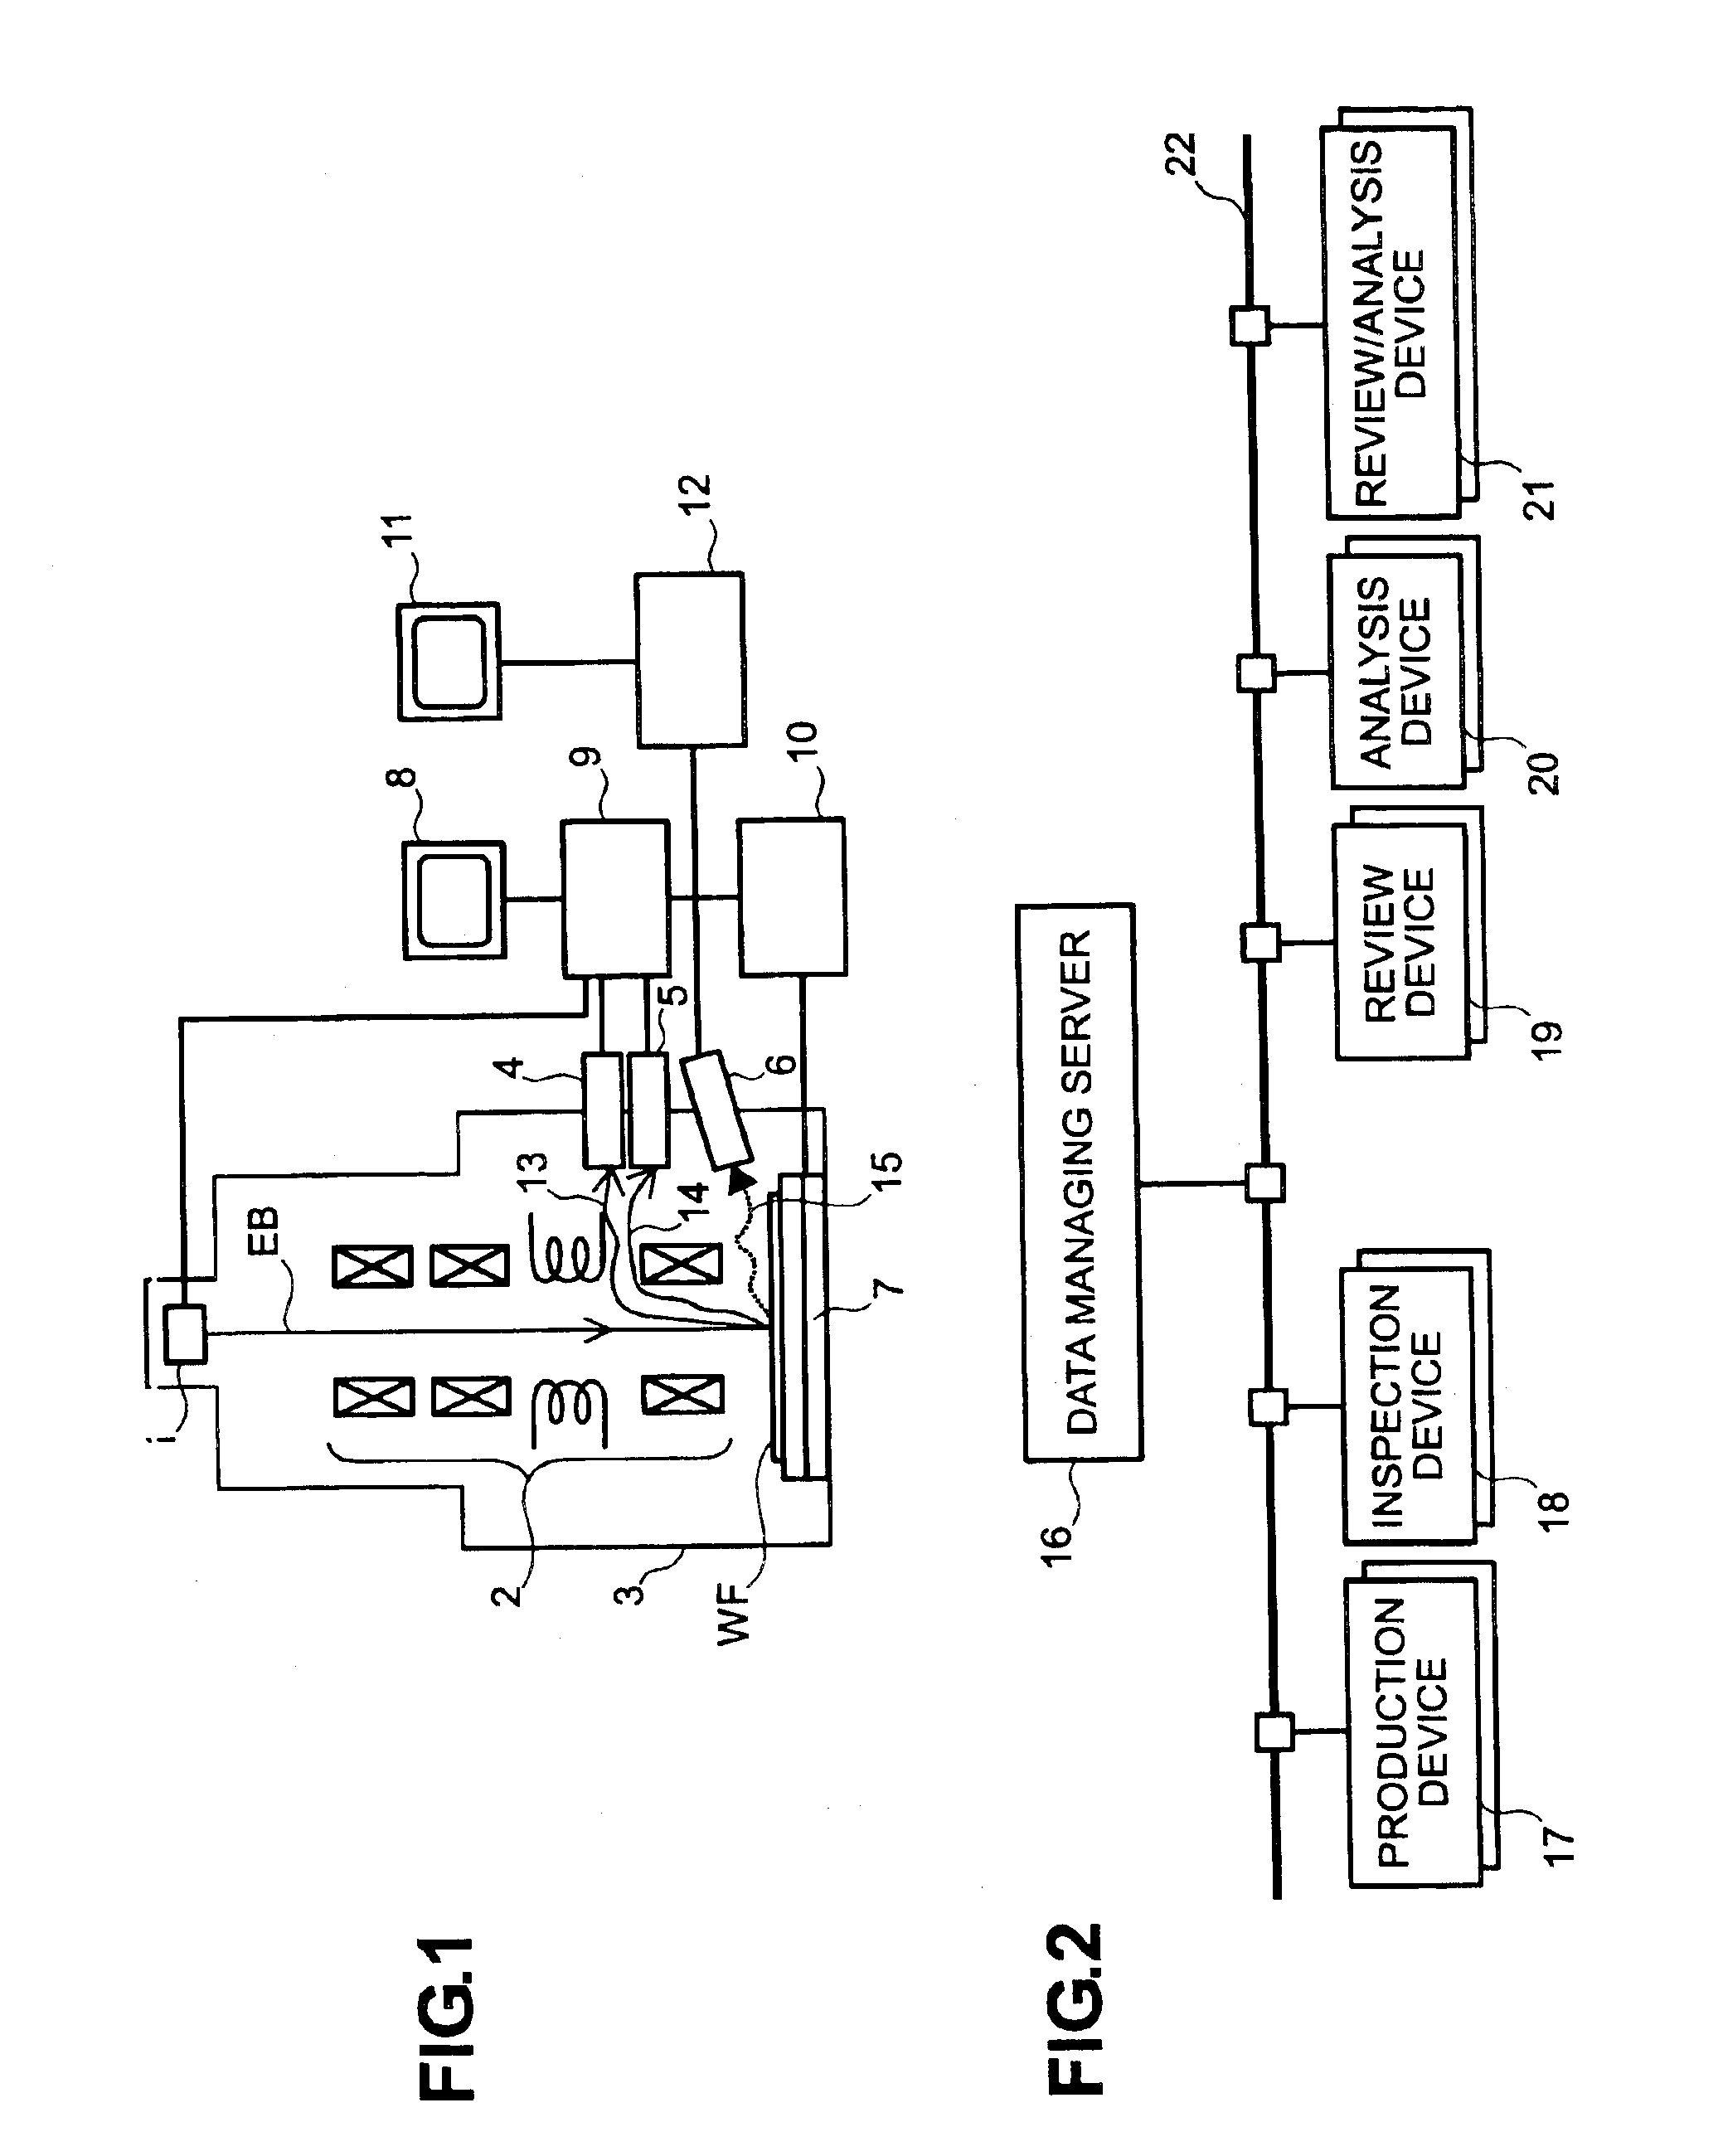 Method and apparatus for analyzing composition of defects